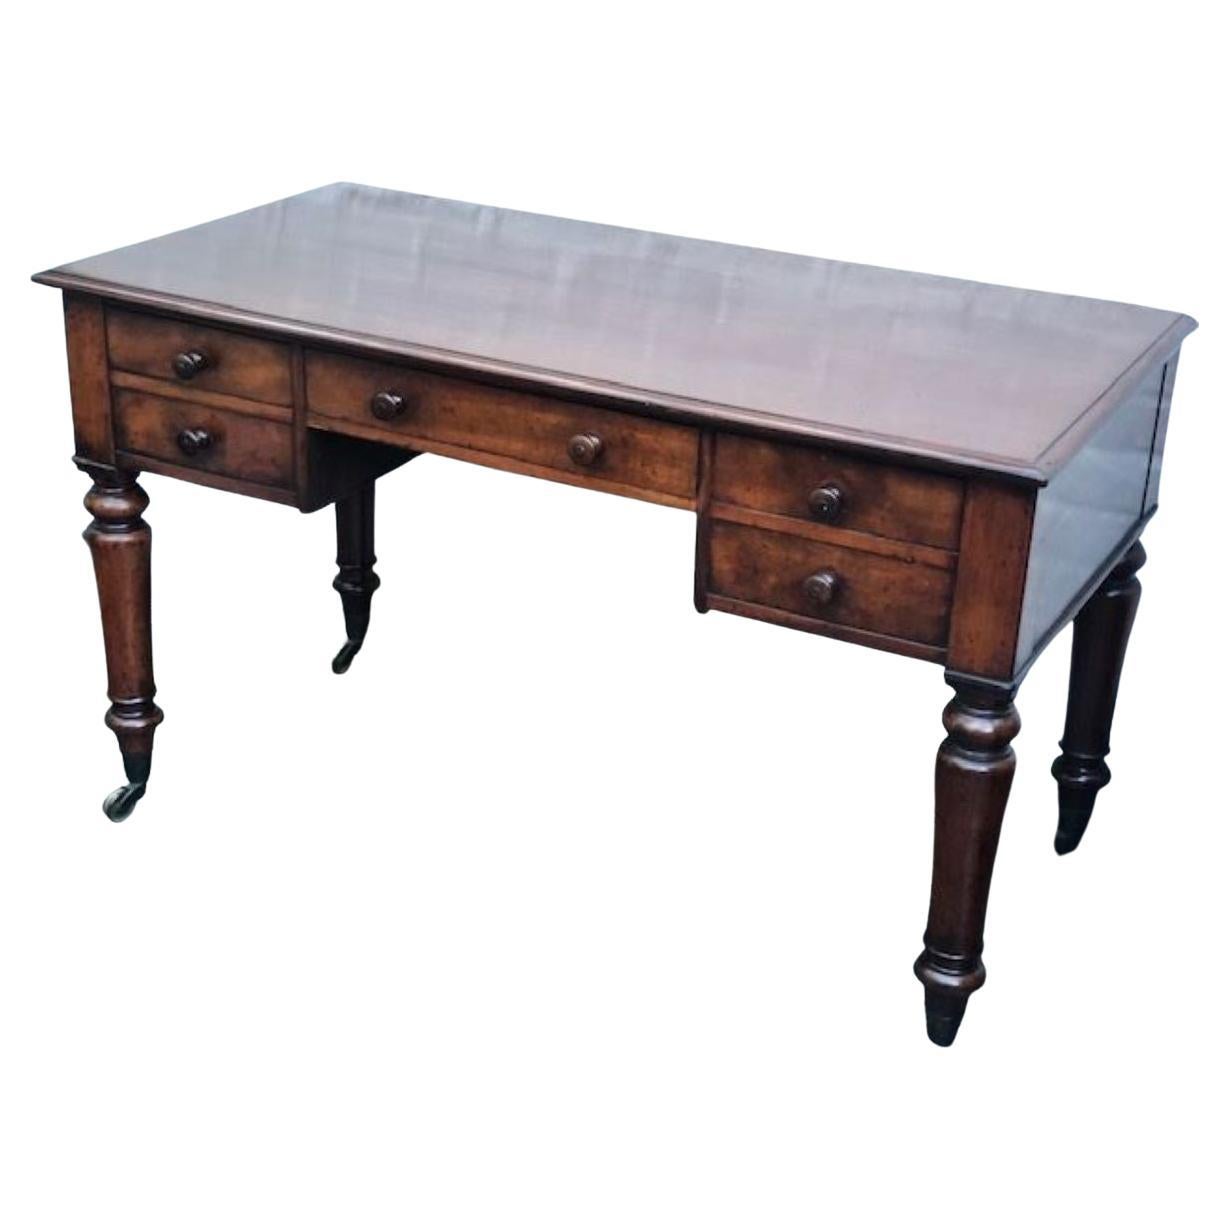 Antique Victorian oak & mahogany desk, writing table, English

Beautiful antique oak & mahogany Victorian desk, writing table. Made up of one large single central draw, and two dummy drawers either side, a flap drops down to reveal a spacious